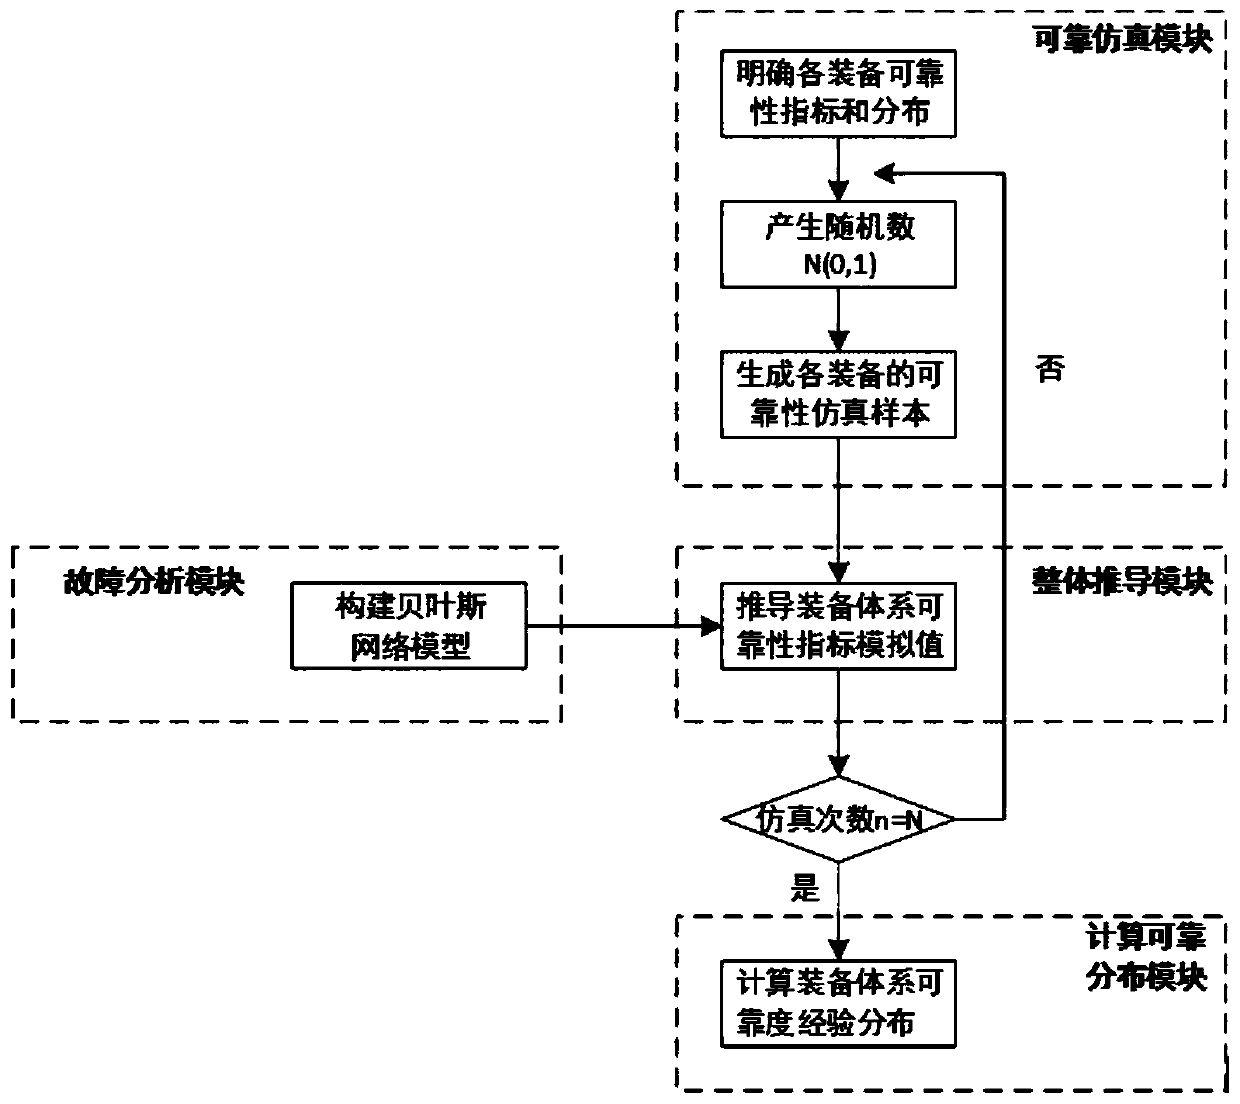 Monte carlo-based network range equipment system reliability modeling system and Monte carlo-based network range equipment system reliability modeling method